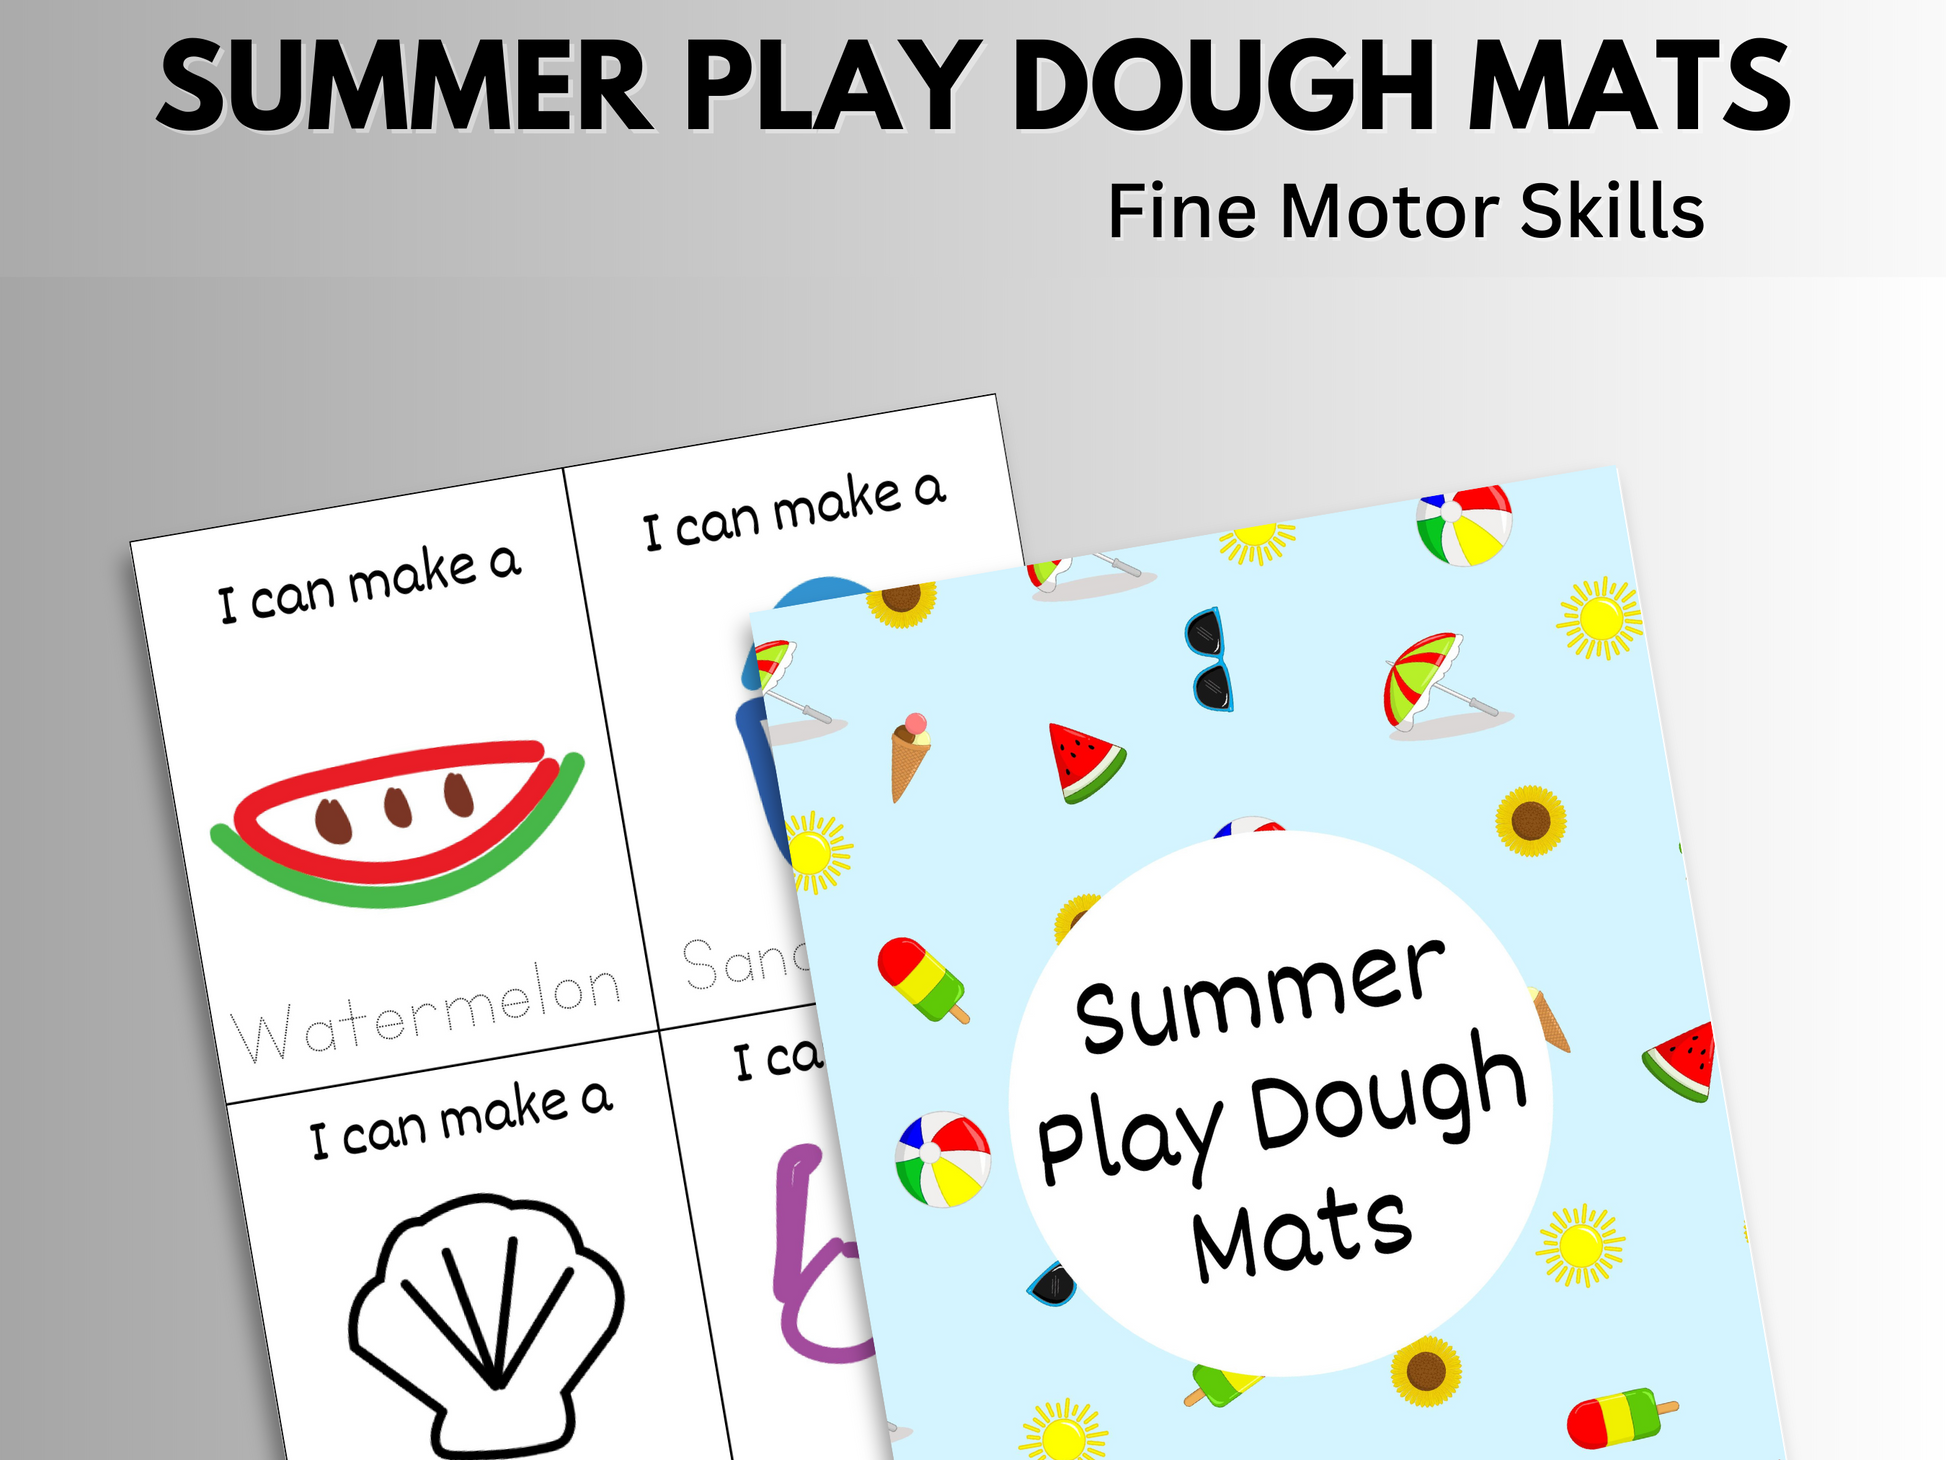 summer play dough mats fine motor skills showing 4 different designs and cover page.